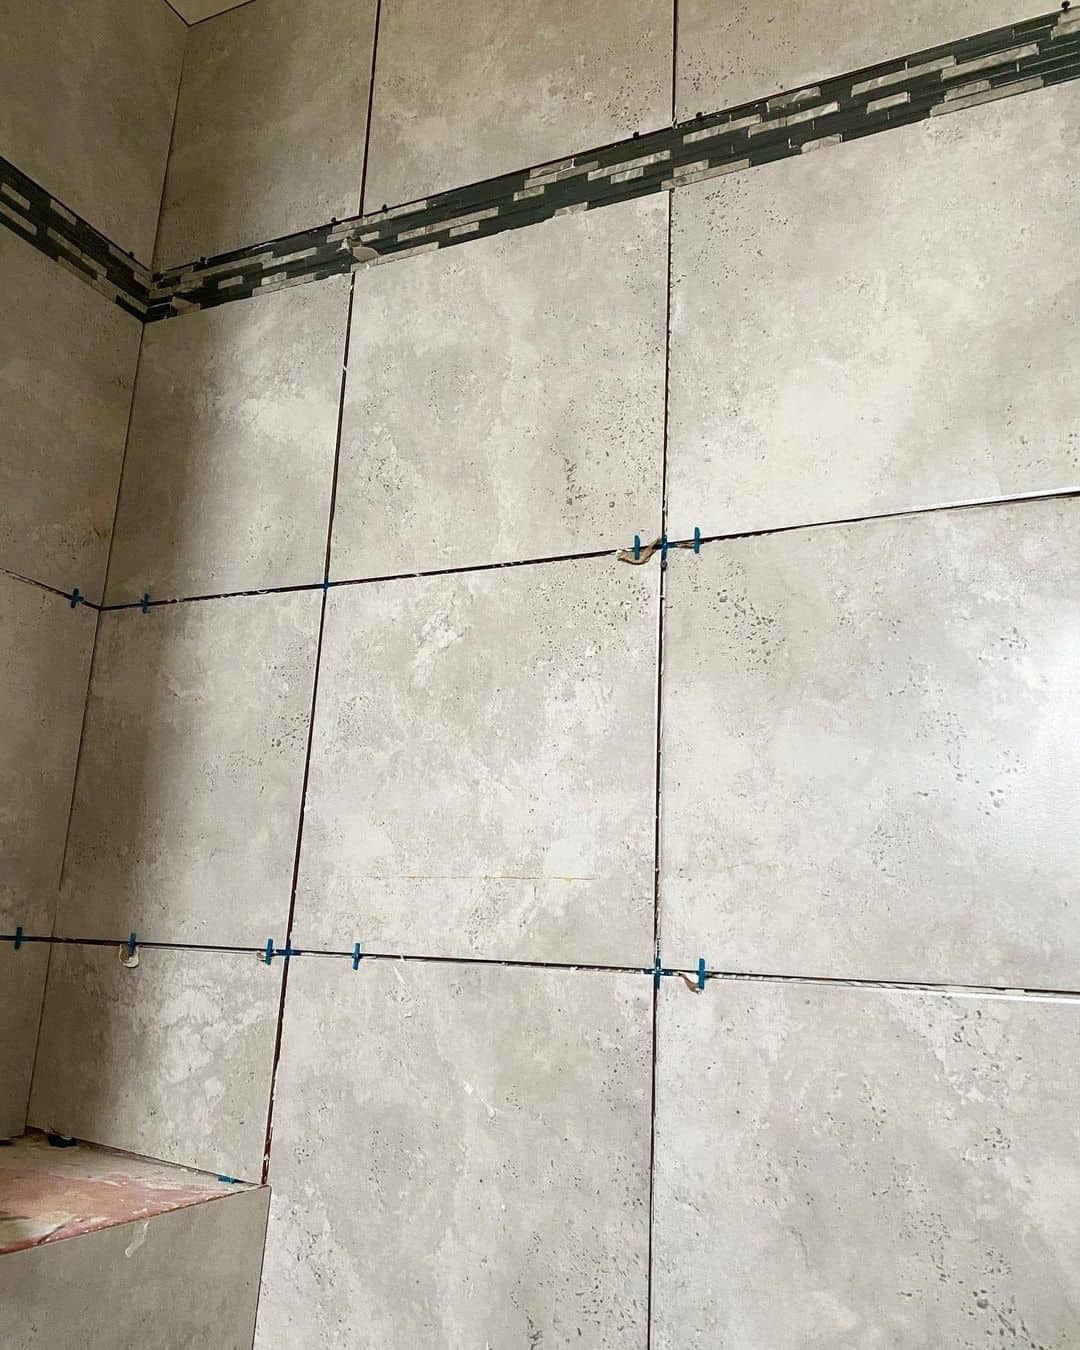 Tips to Consider When Drilling Tiles